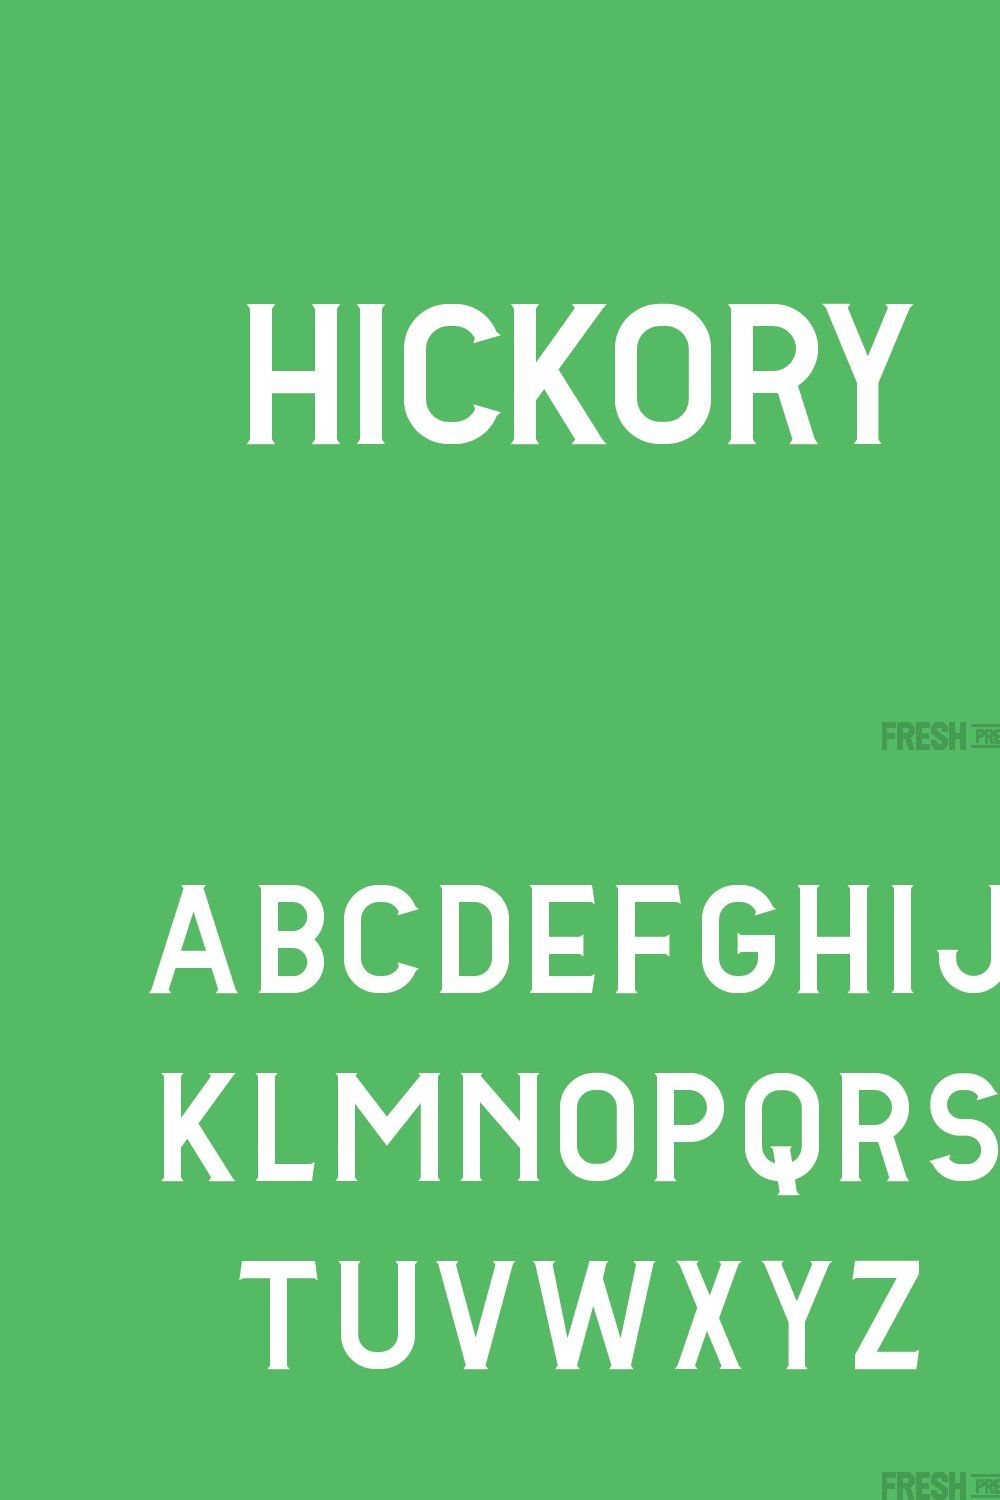 Hickory pinterest preview image.